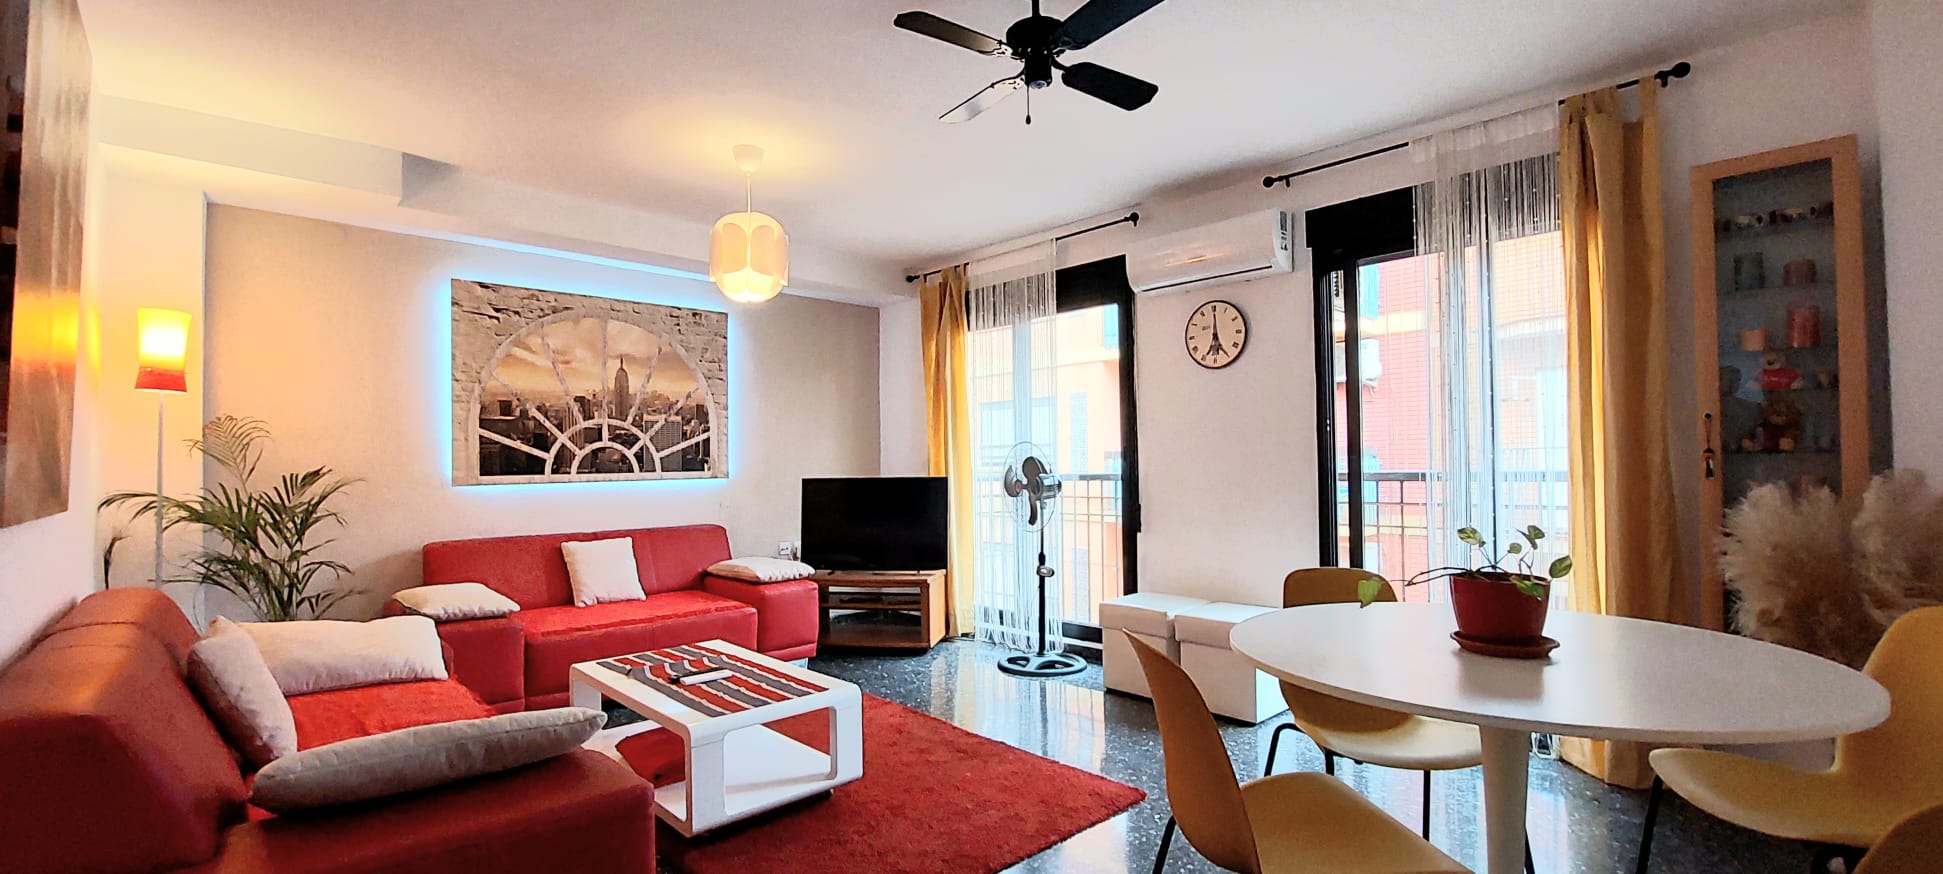 Costa - Furnished apartment for rent in Valencia